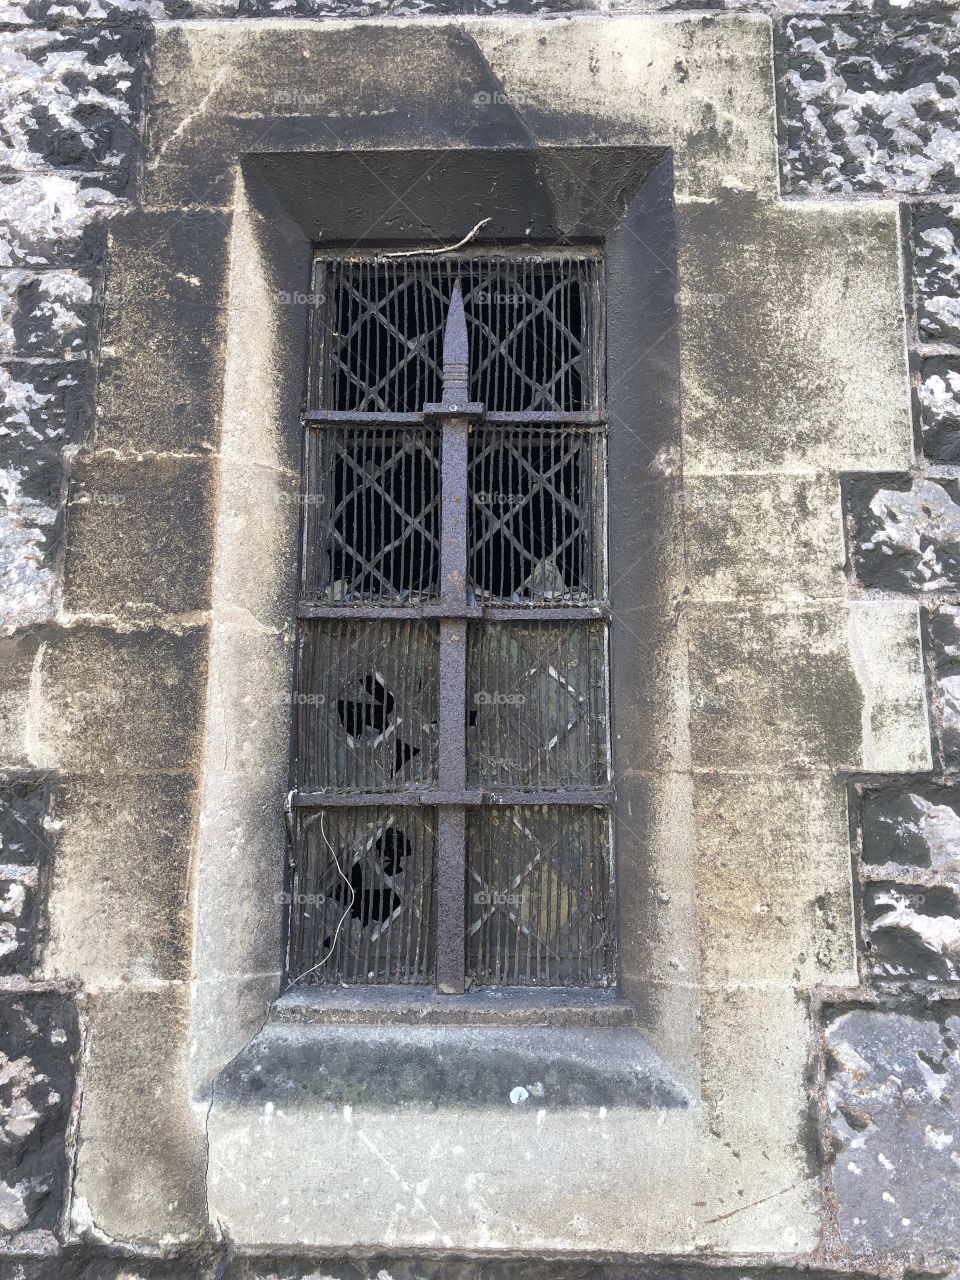 Dilapidated and unloved and part of a structure of a house of god, surely this window deserves some loving attention urgently.